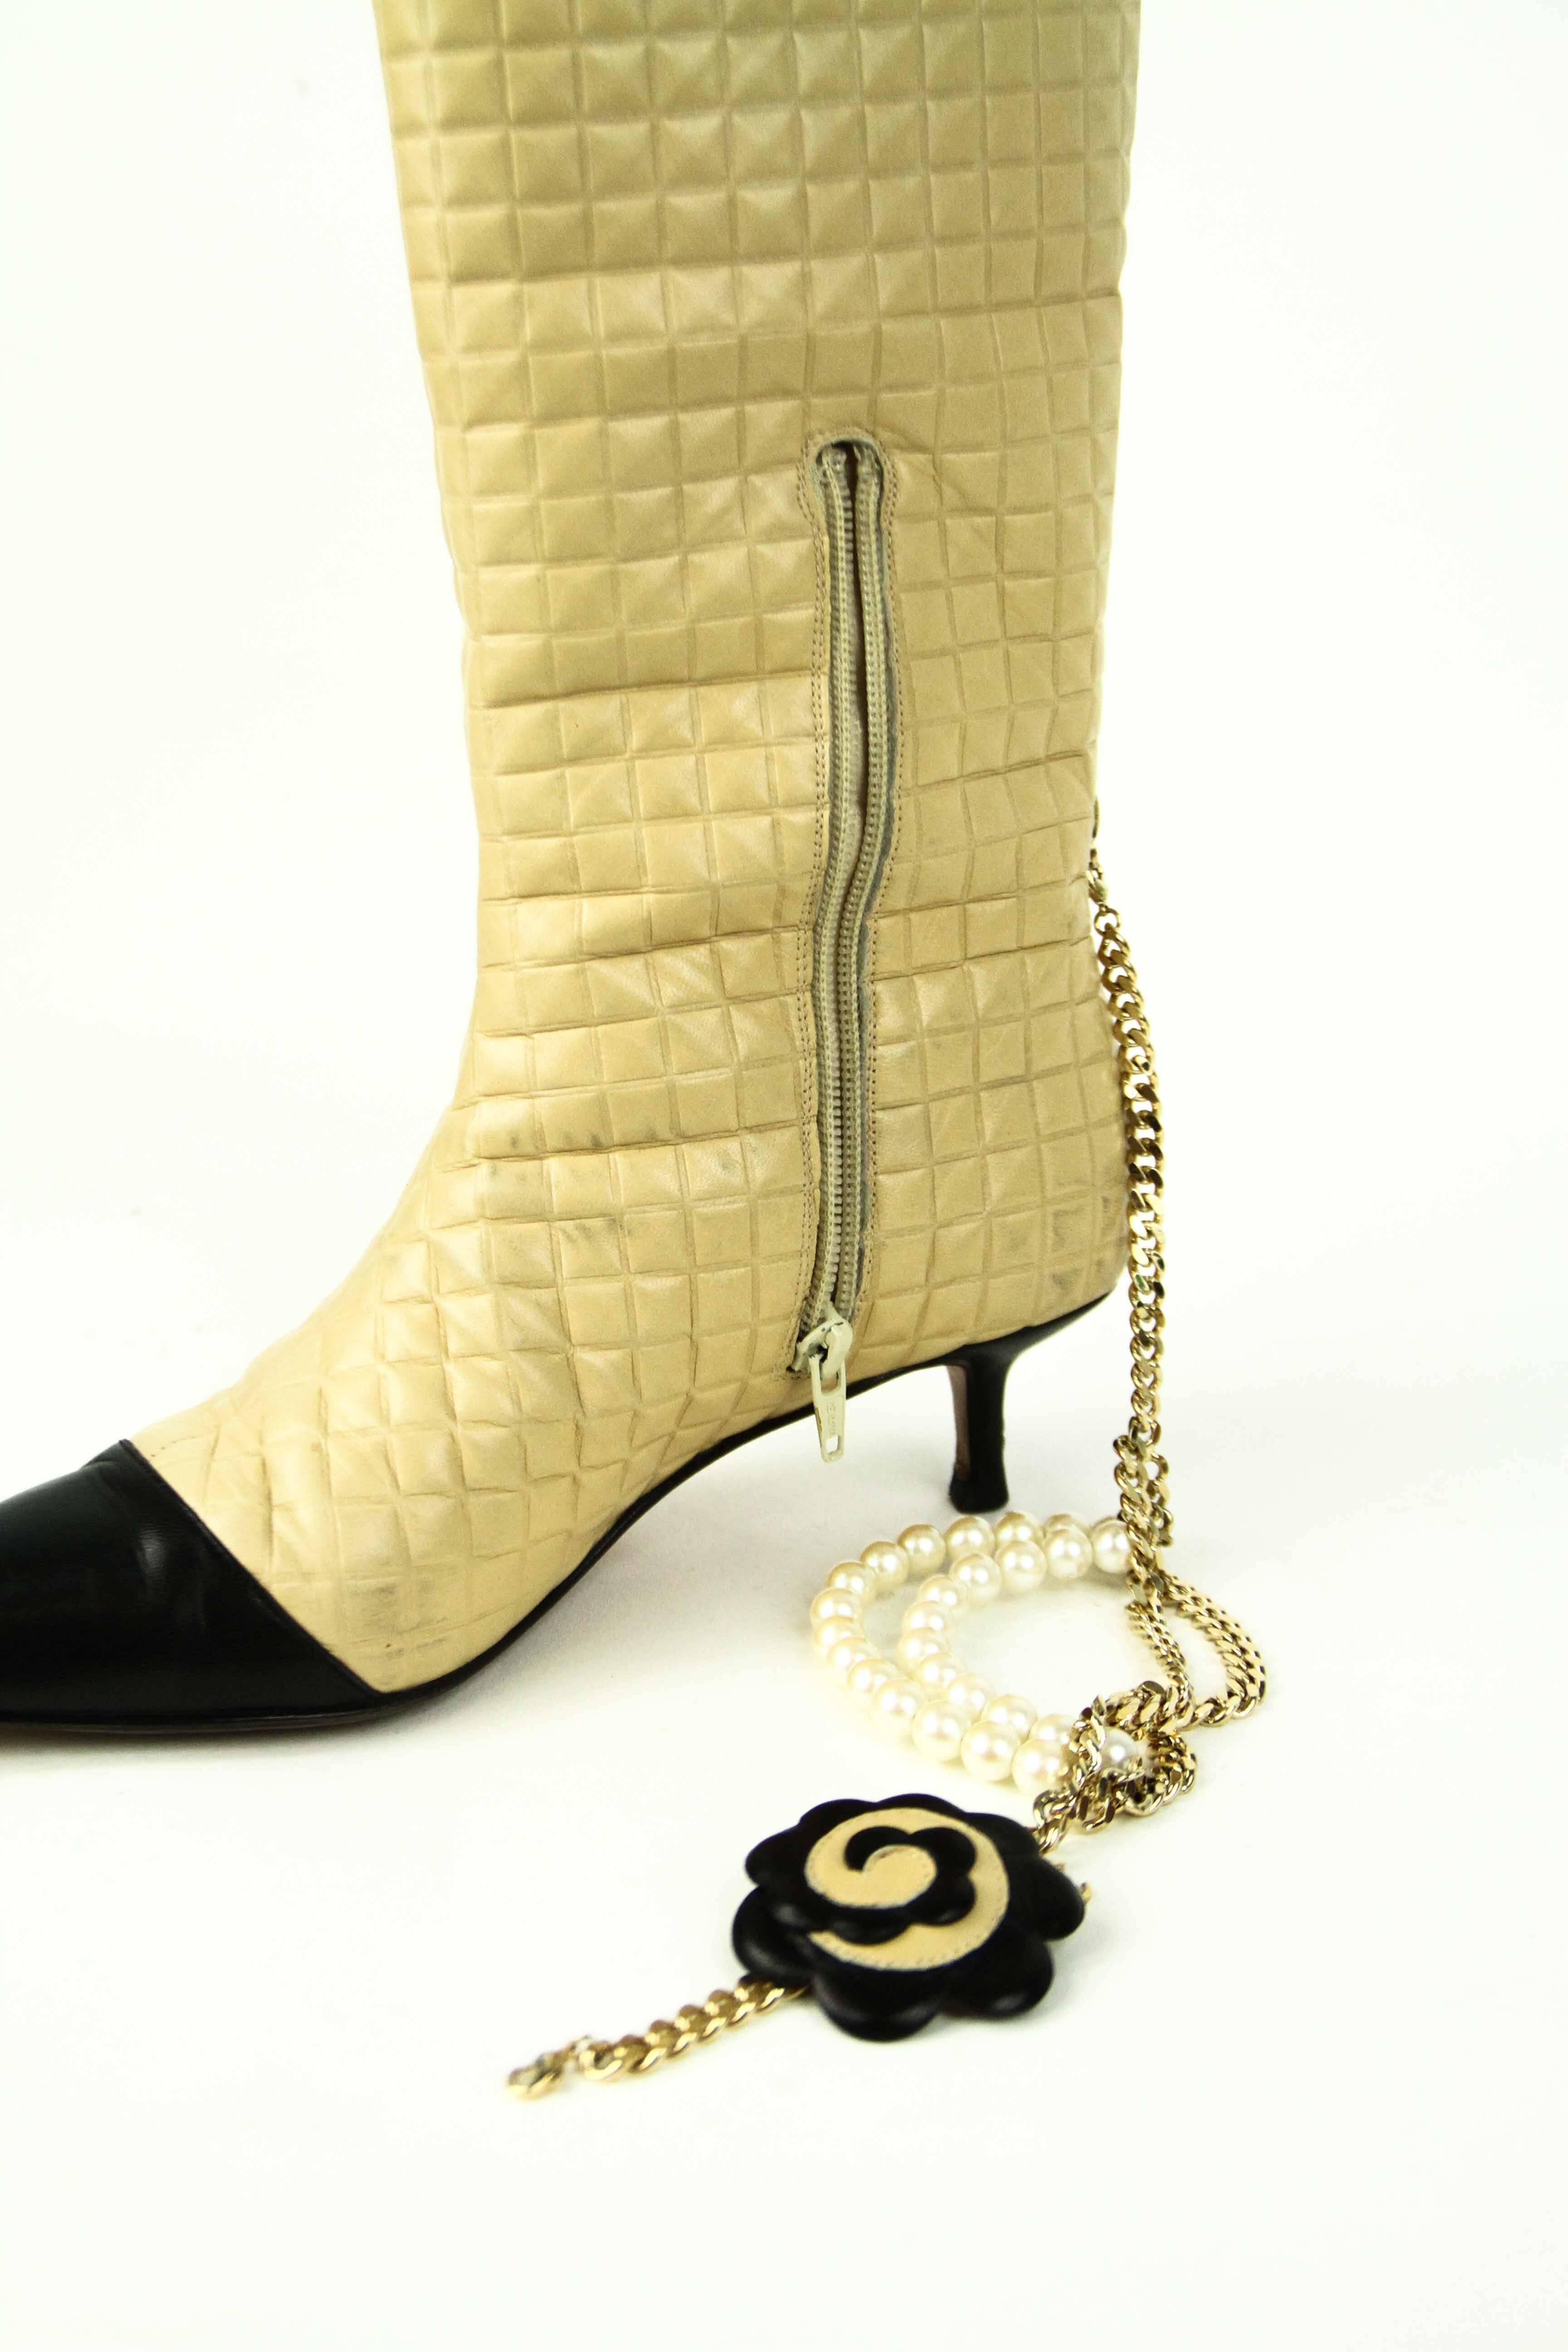 Women's CHANEL Quilted Boot with Pearls and Camellia Flower 39.5